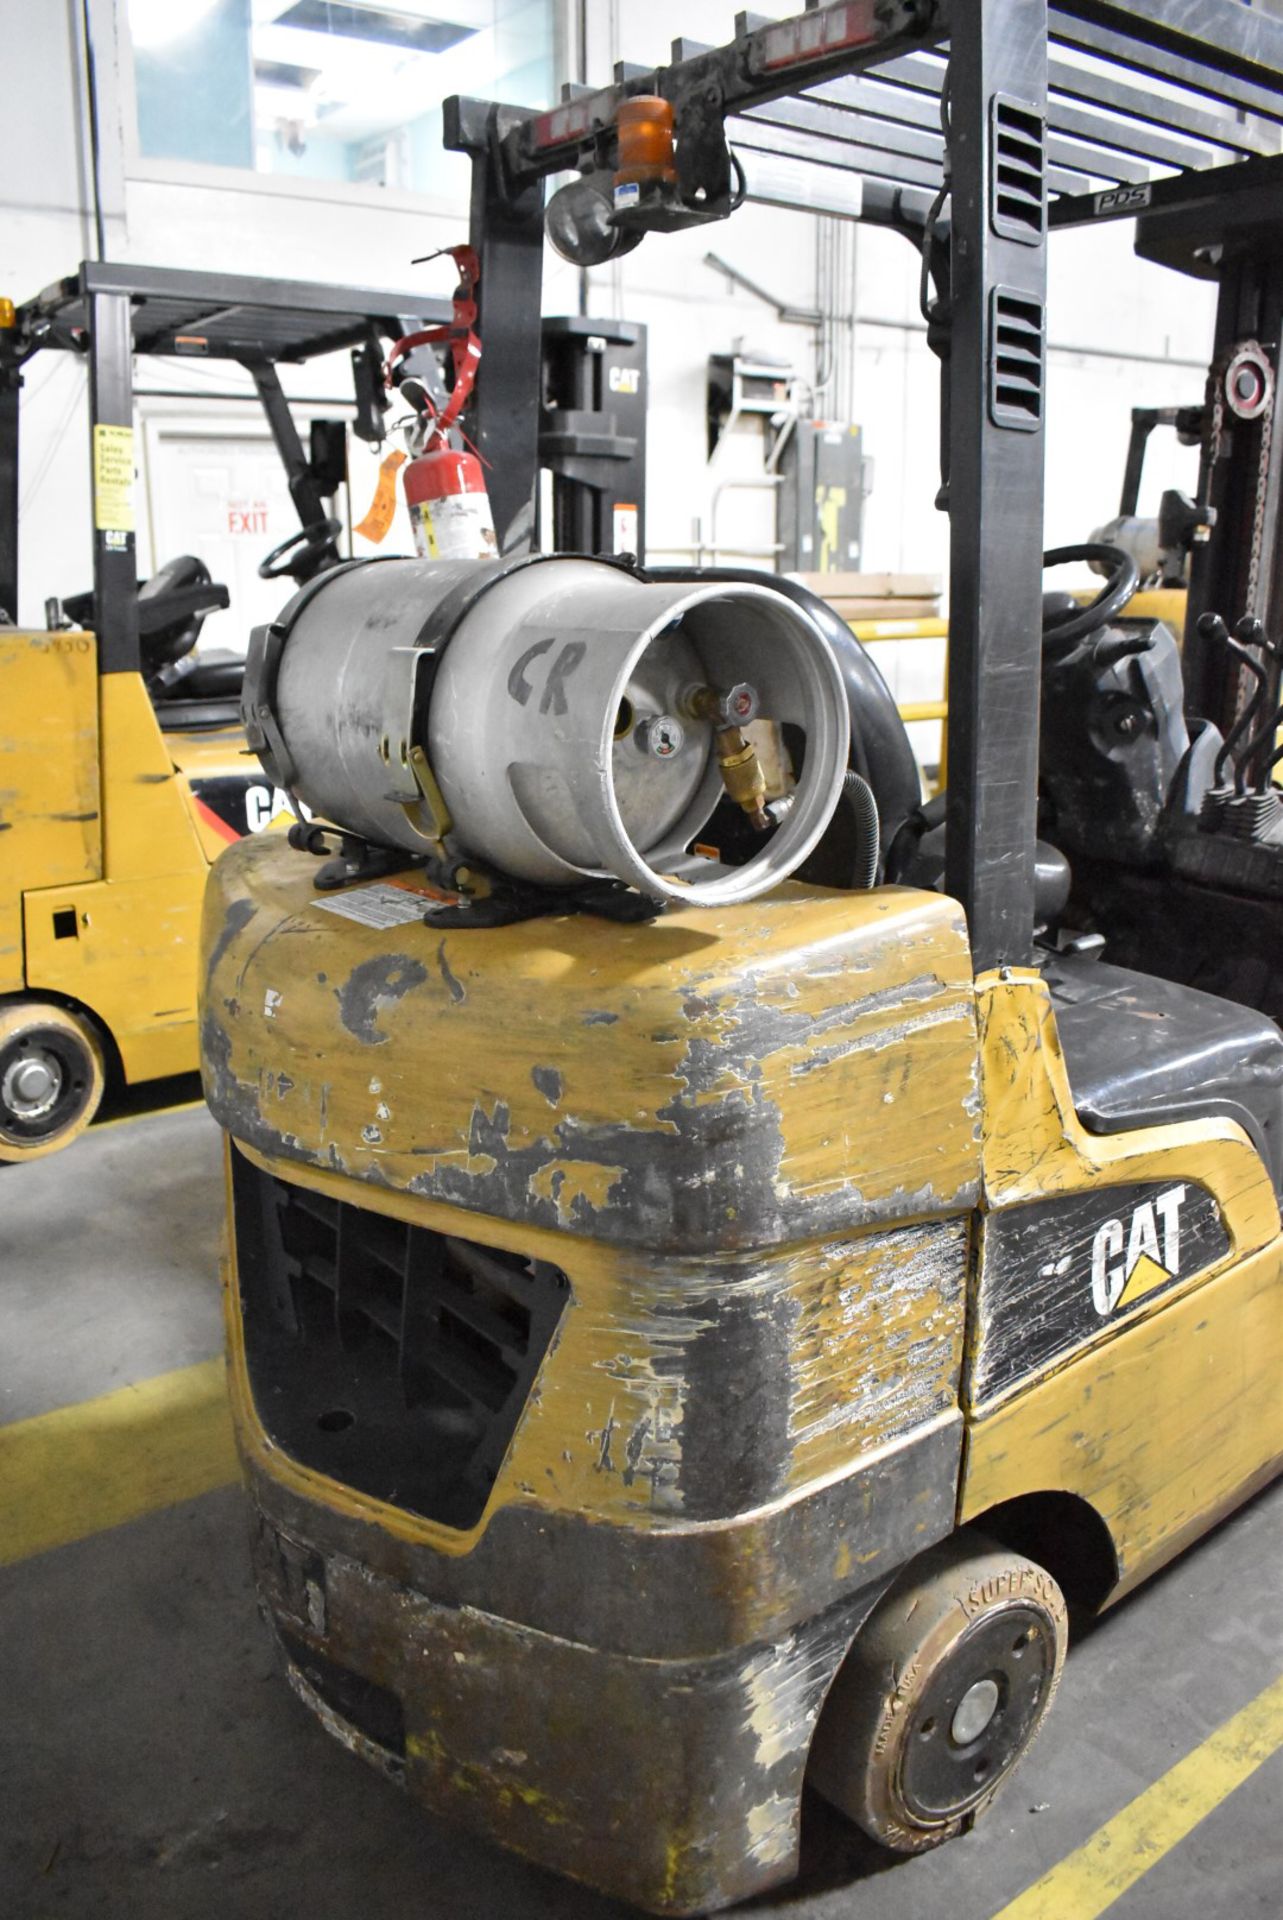 CATERPILLAR 2C6000 6,000 LBS. CAPACITY LPG FORKLIFT WITH 185" MAX VERTICAL REACH, 3-STAGE HIGH - Image 6 of 10